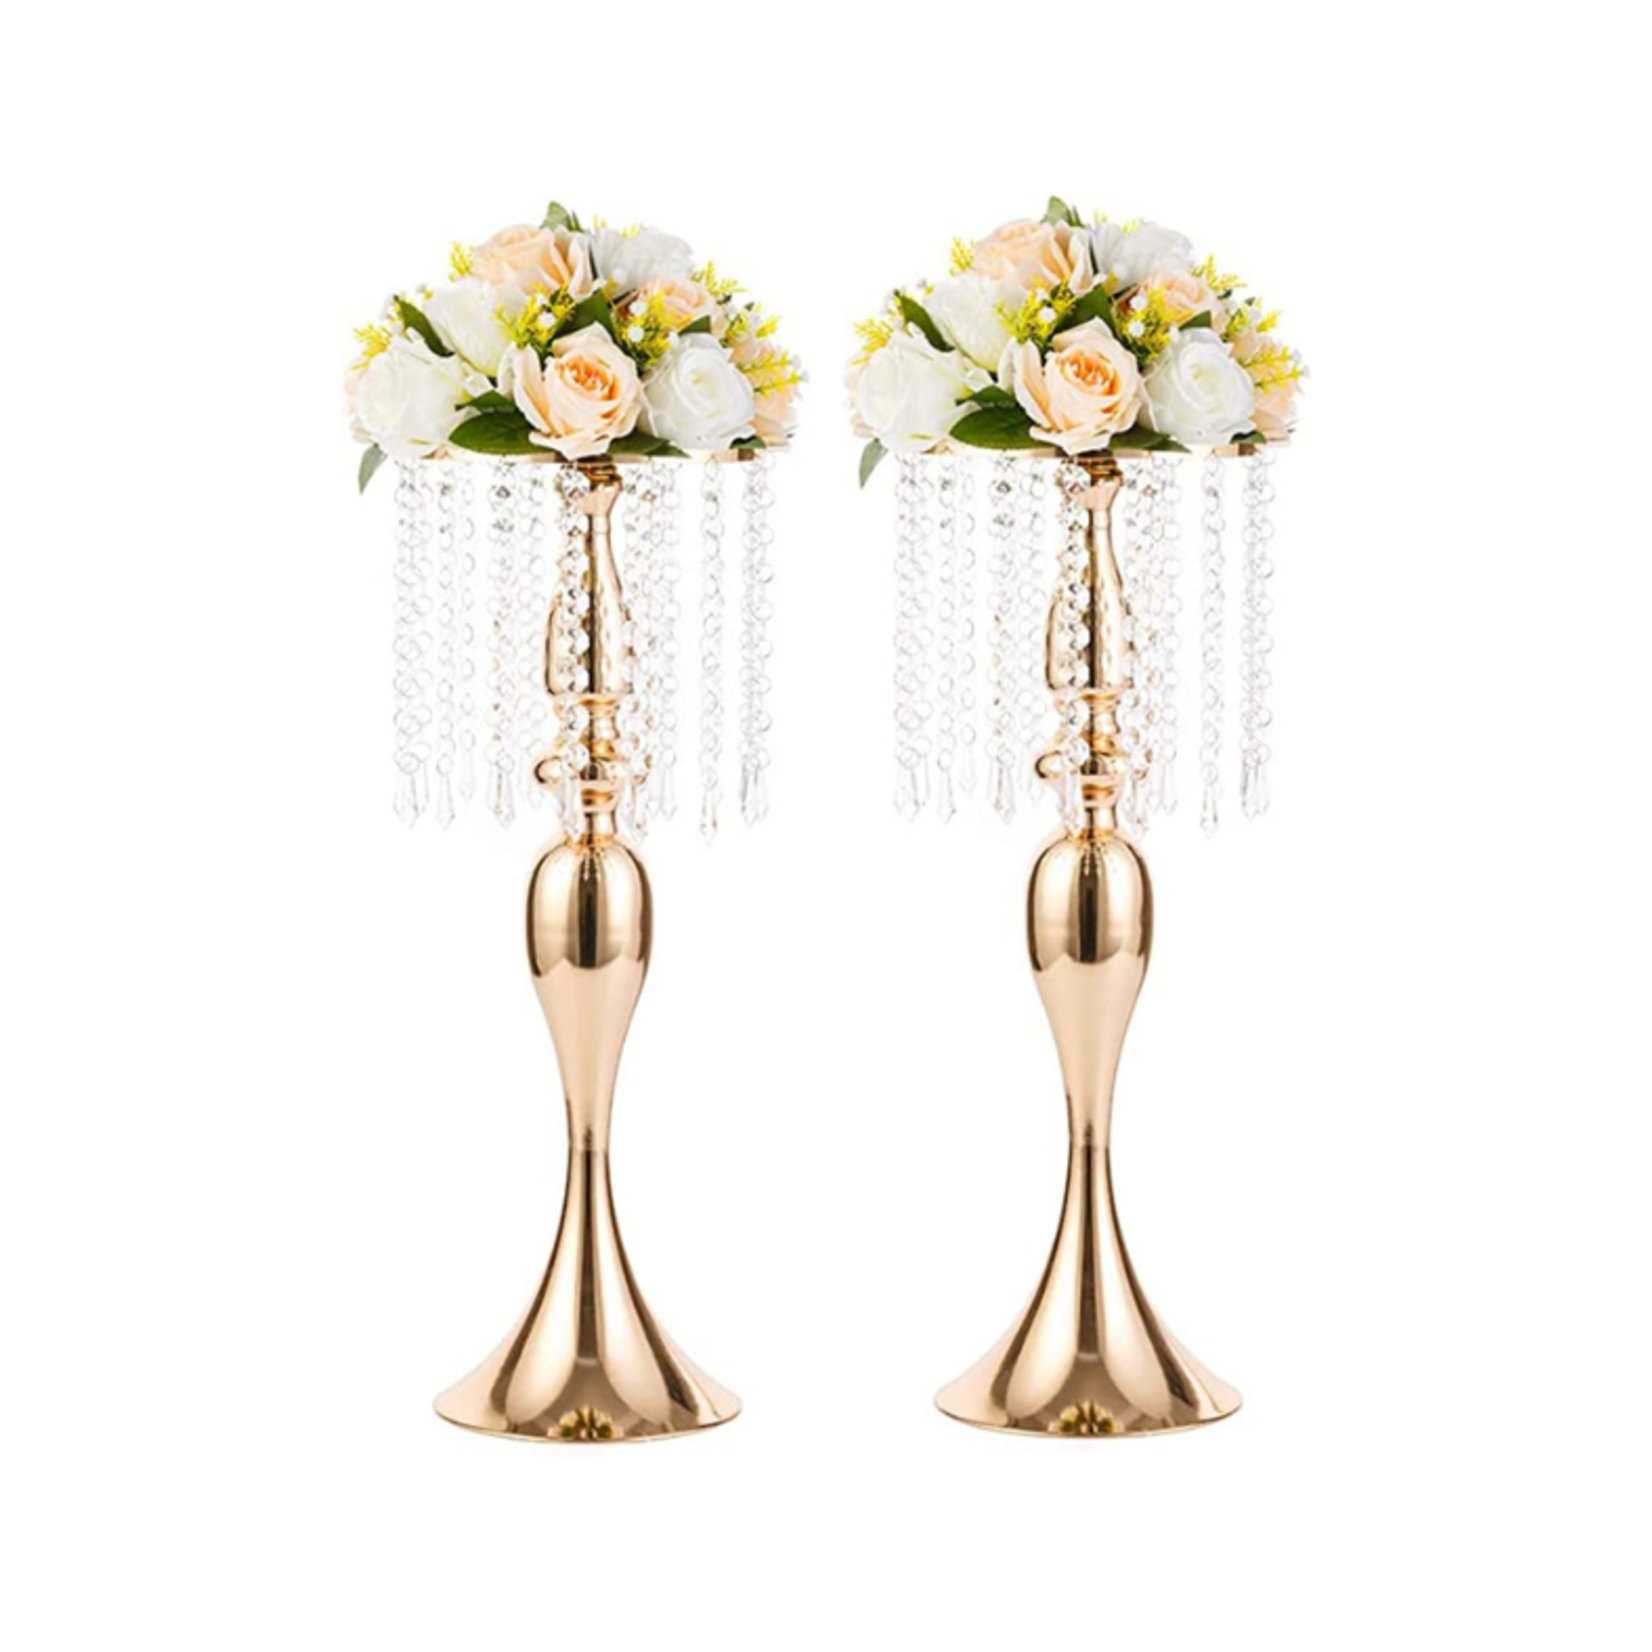 Nuptio Tall Crystal Flower Stand 2 Pc - Gold